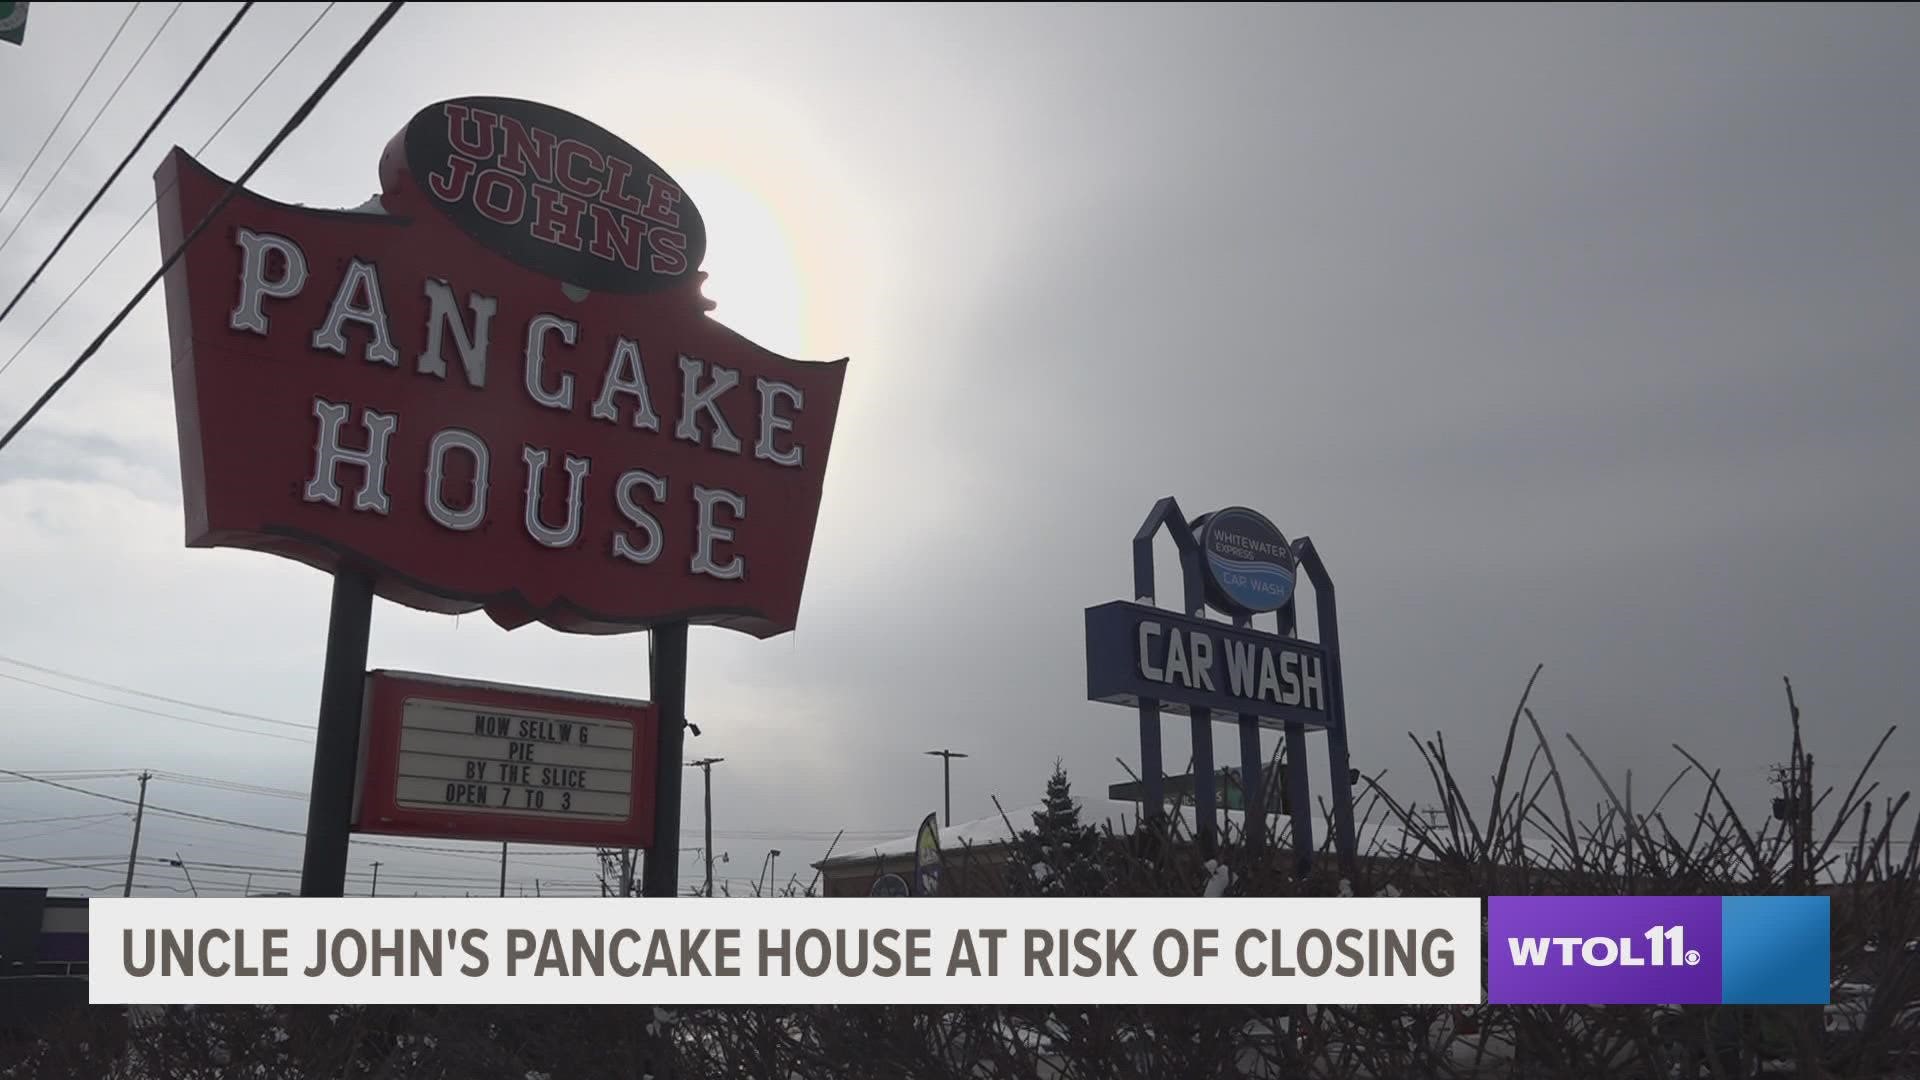 Uncle John's Pancake House has been a Westgate staple for over 60 years. Countless Toledoans have grown up on silver-dollar pancakes, but the specials may soon end.